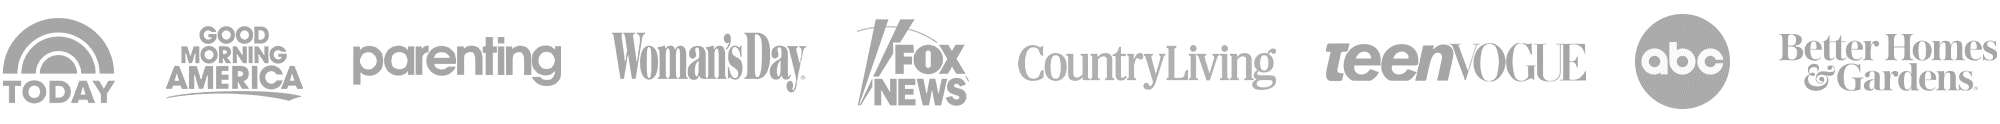 Press Logos: Today, GMA, Parenting, Woman's Day, FOX, Country Living, Teen Vogue, ABC, BH&G